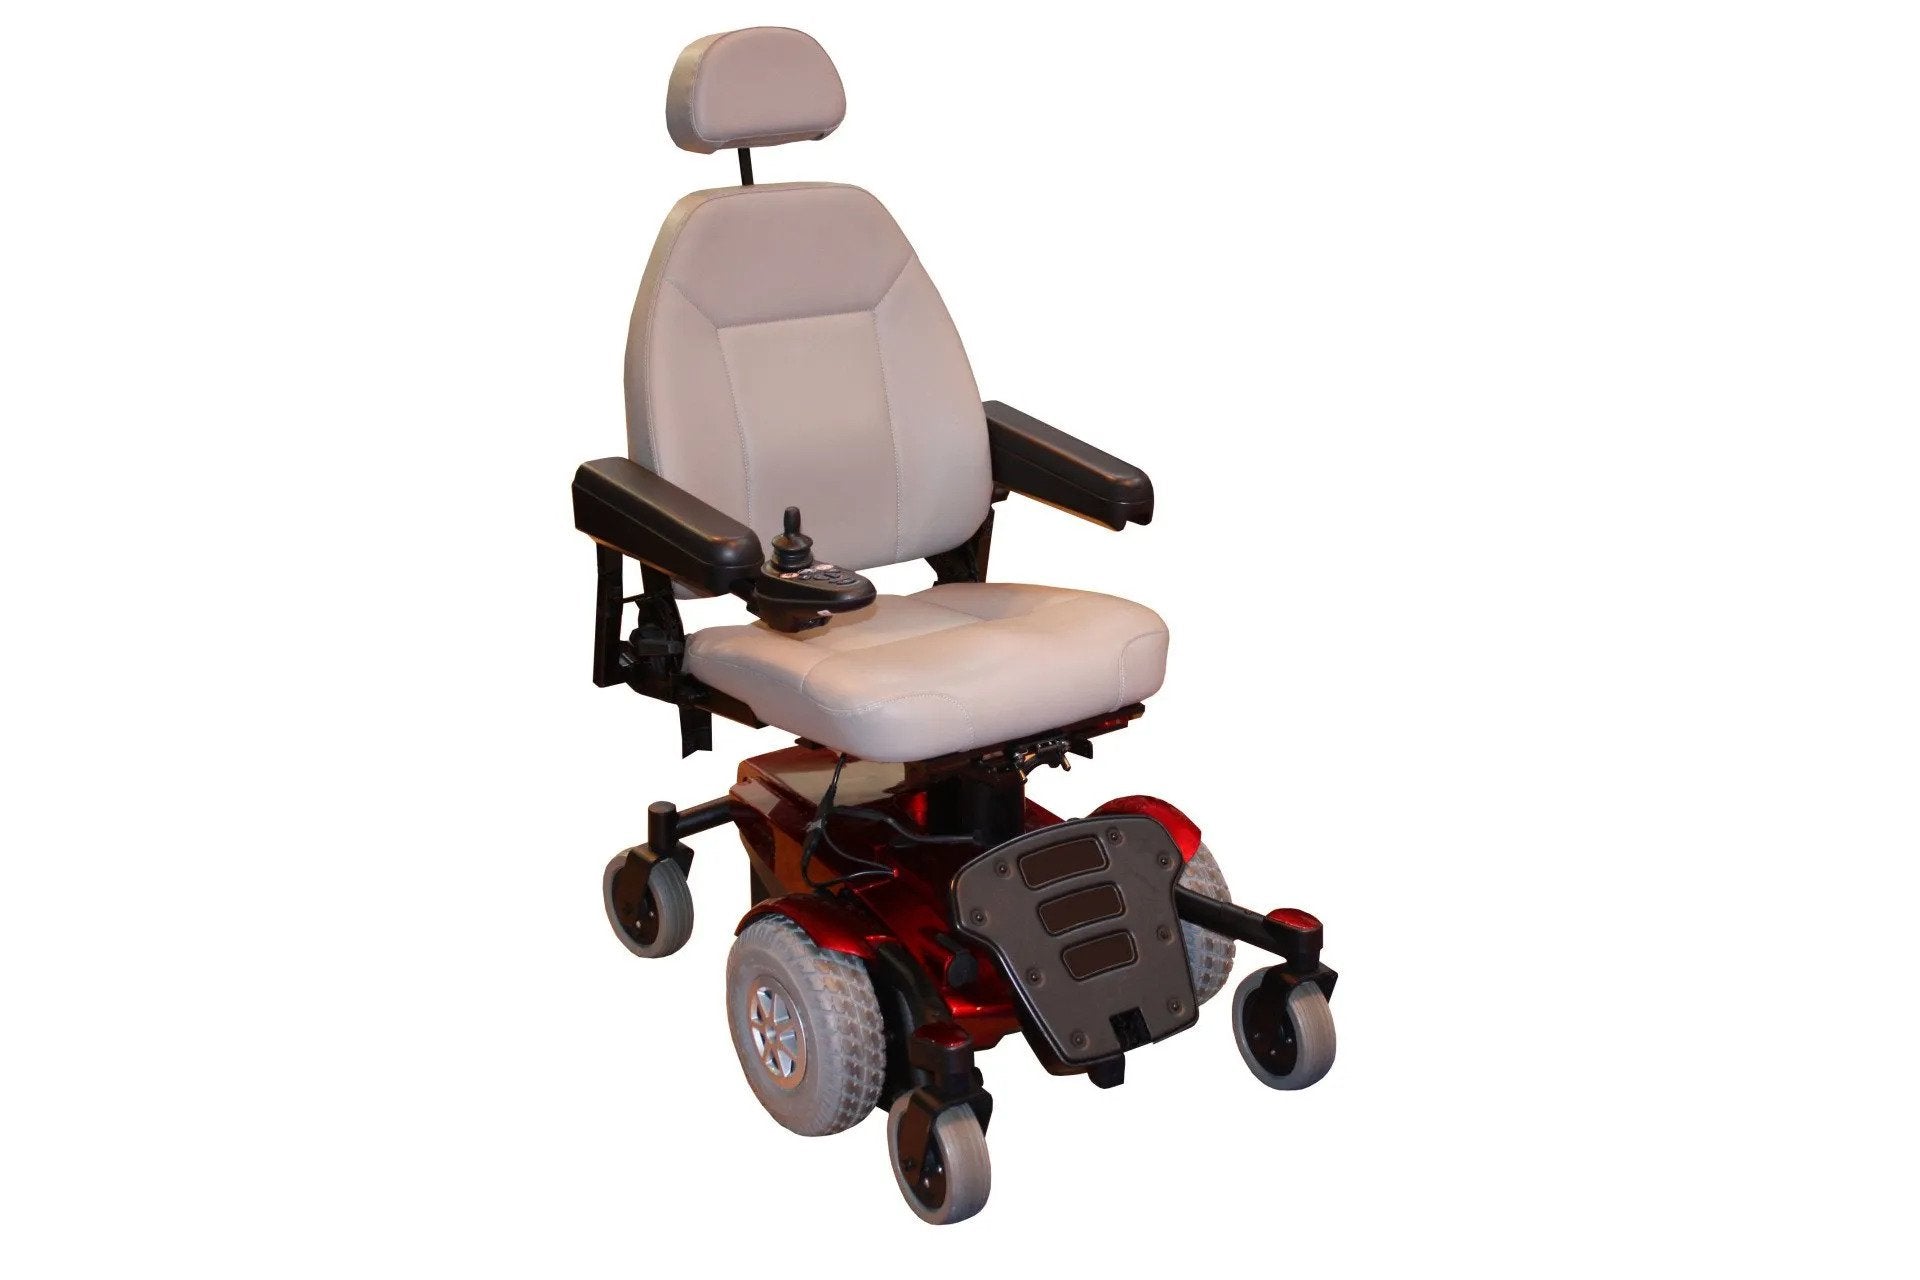 5 Benefits of Power Lift Chairs